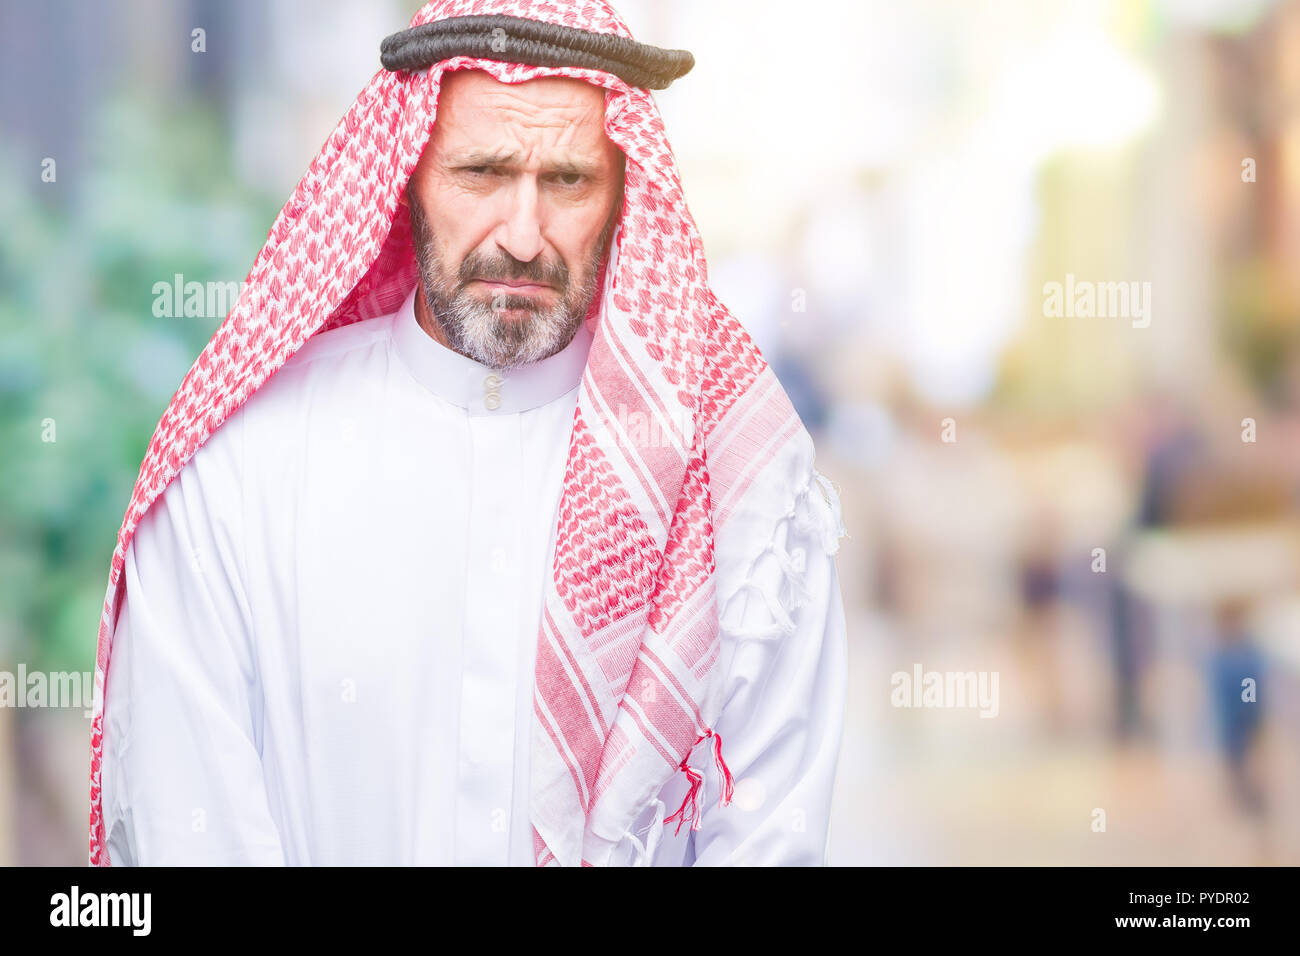 senior-arab-man-wearing-keffiyeh-over-isolated-background-depressed-and-worry-for-distress-crying-angry-and-afraid-sad-expression-PYDR02.jpg